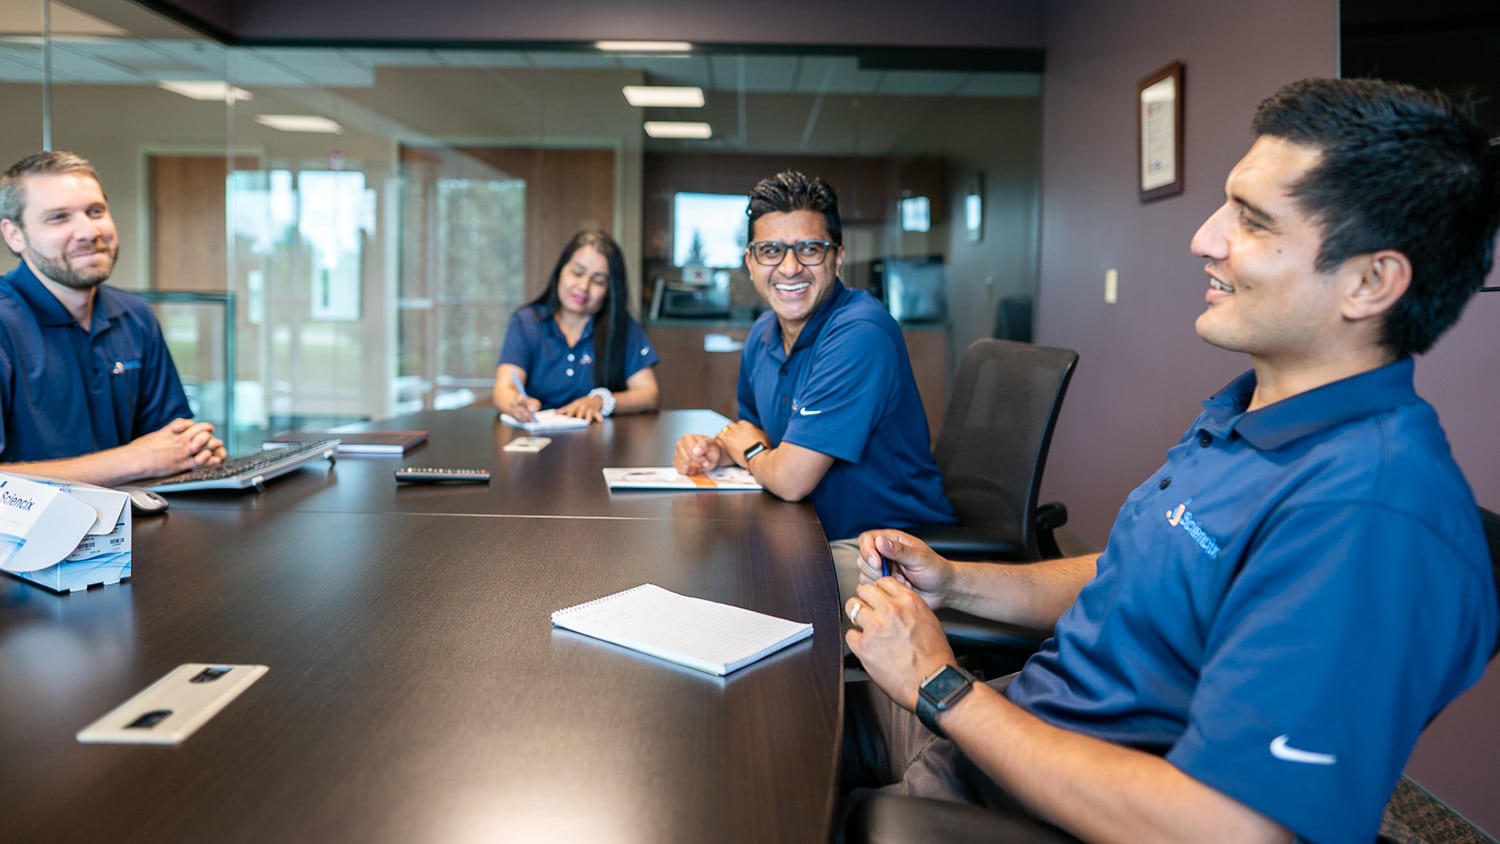 Members of Sciencix sit around a conference table and talk. They are wearing matching blue polos with the company's logo.